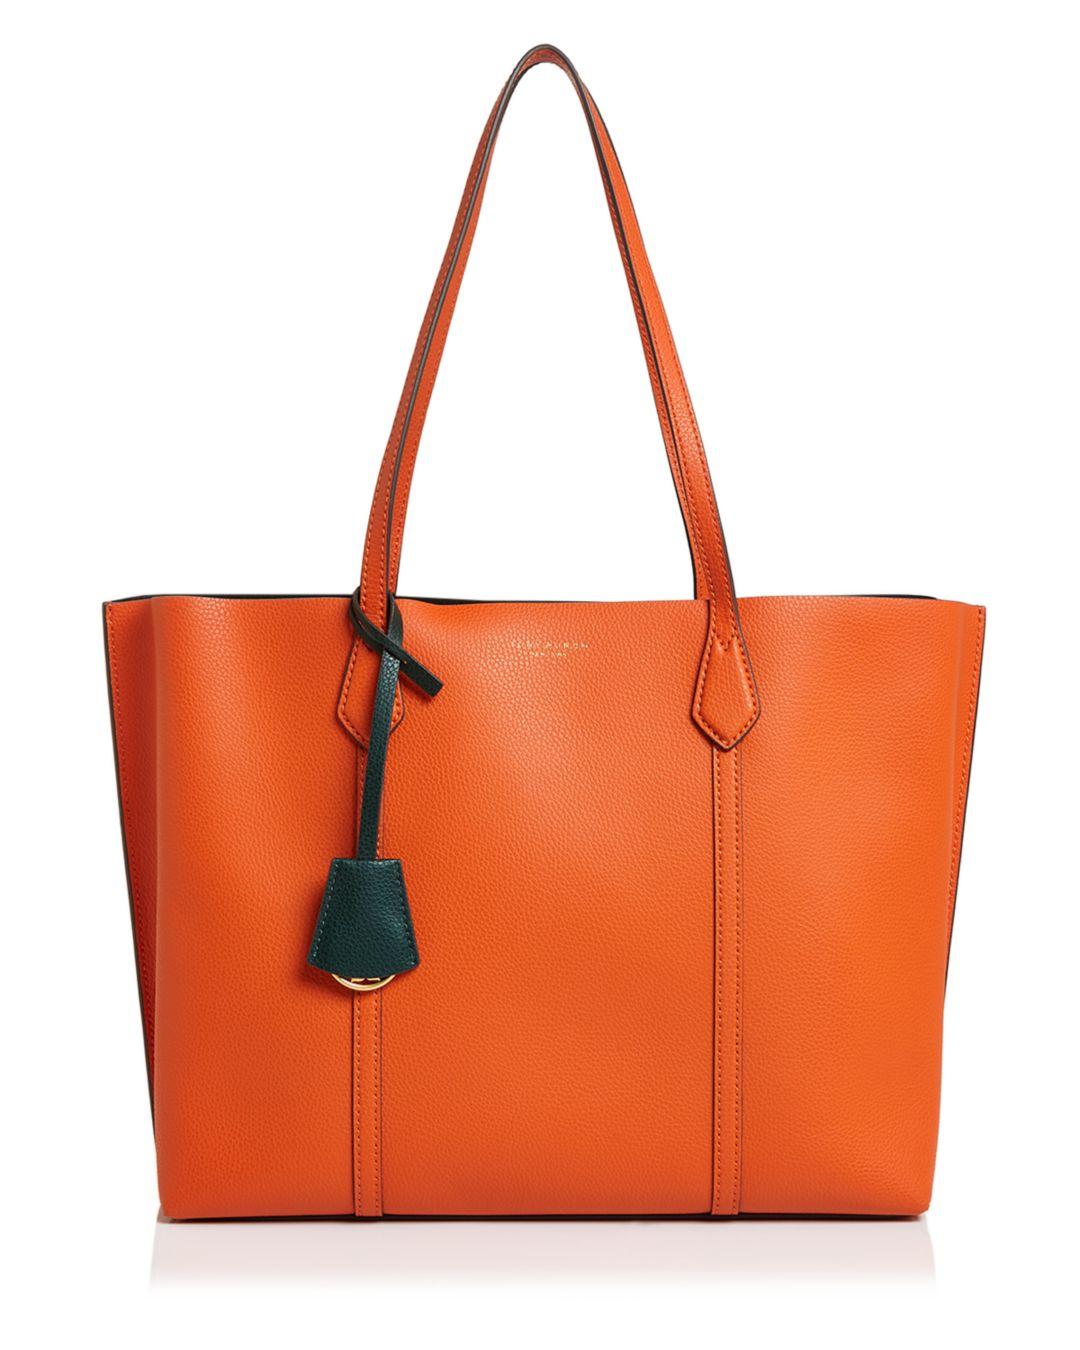 Tory Burch Perry Leather Tote Bag in Orange | Lyst